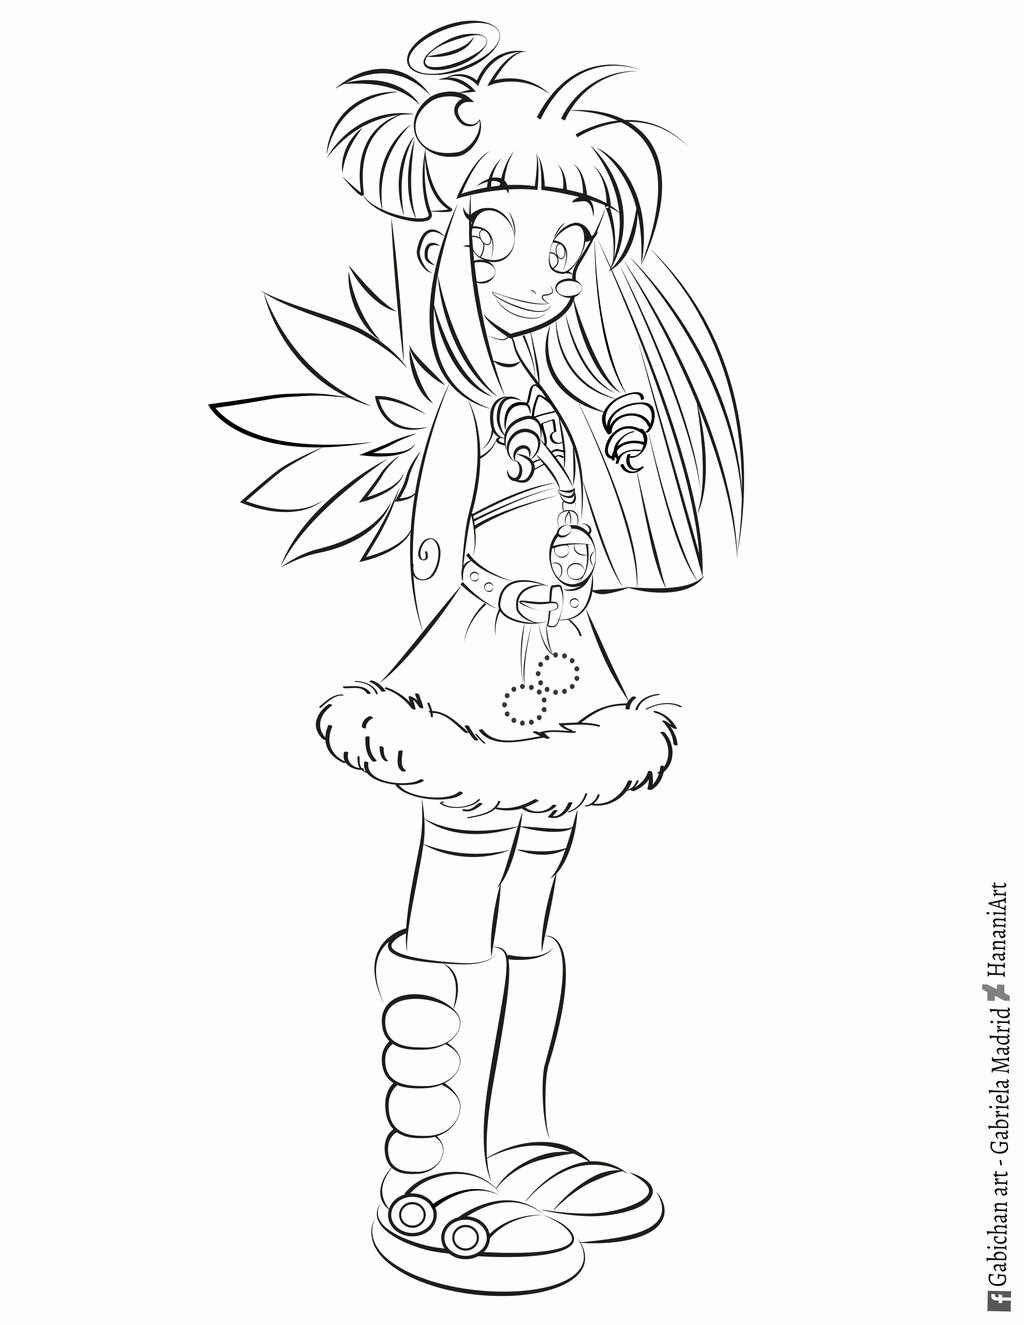 Raf Coloring Page (Angel's Friends) by HananiArt on DeviantArt